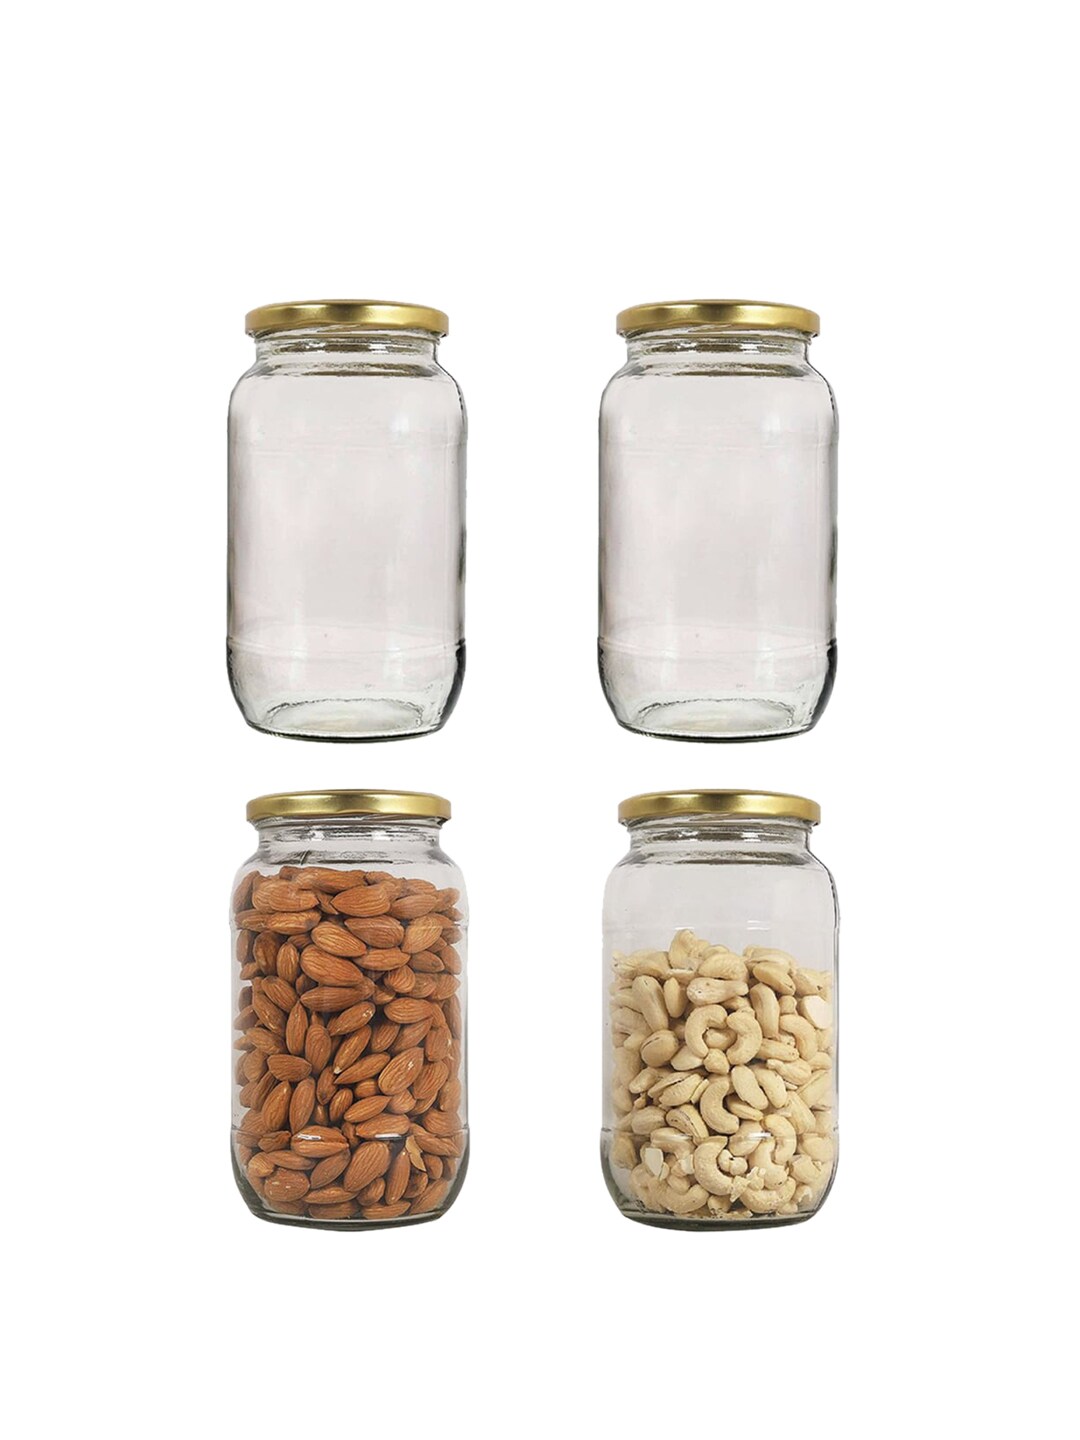 Home Centre Corsica Essentials Set Of 4 Transparent Glass Storage Jars with Lid - 1000 ml Price in India